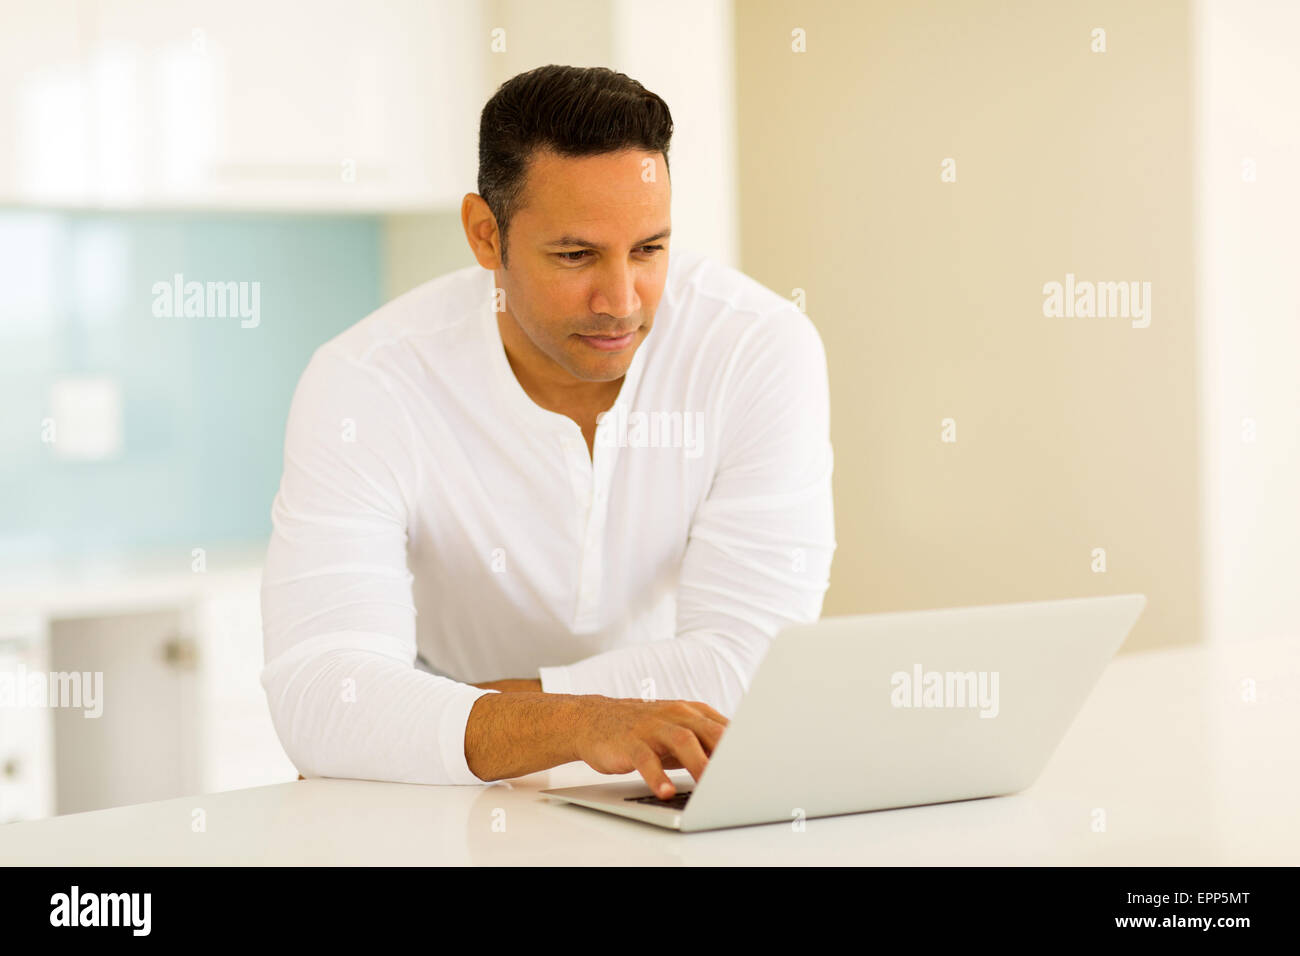 modern man reading emails on laptop computer Stock Photo